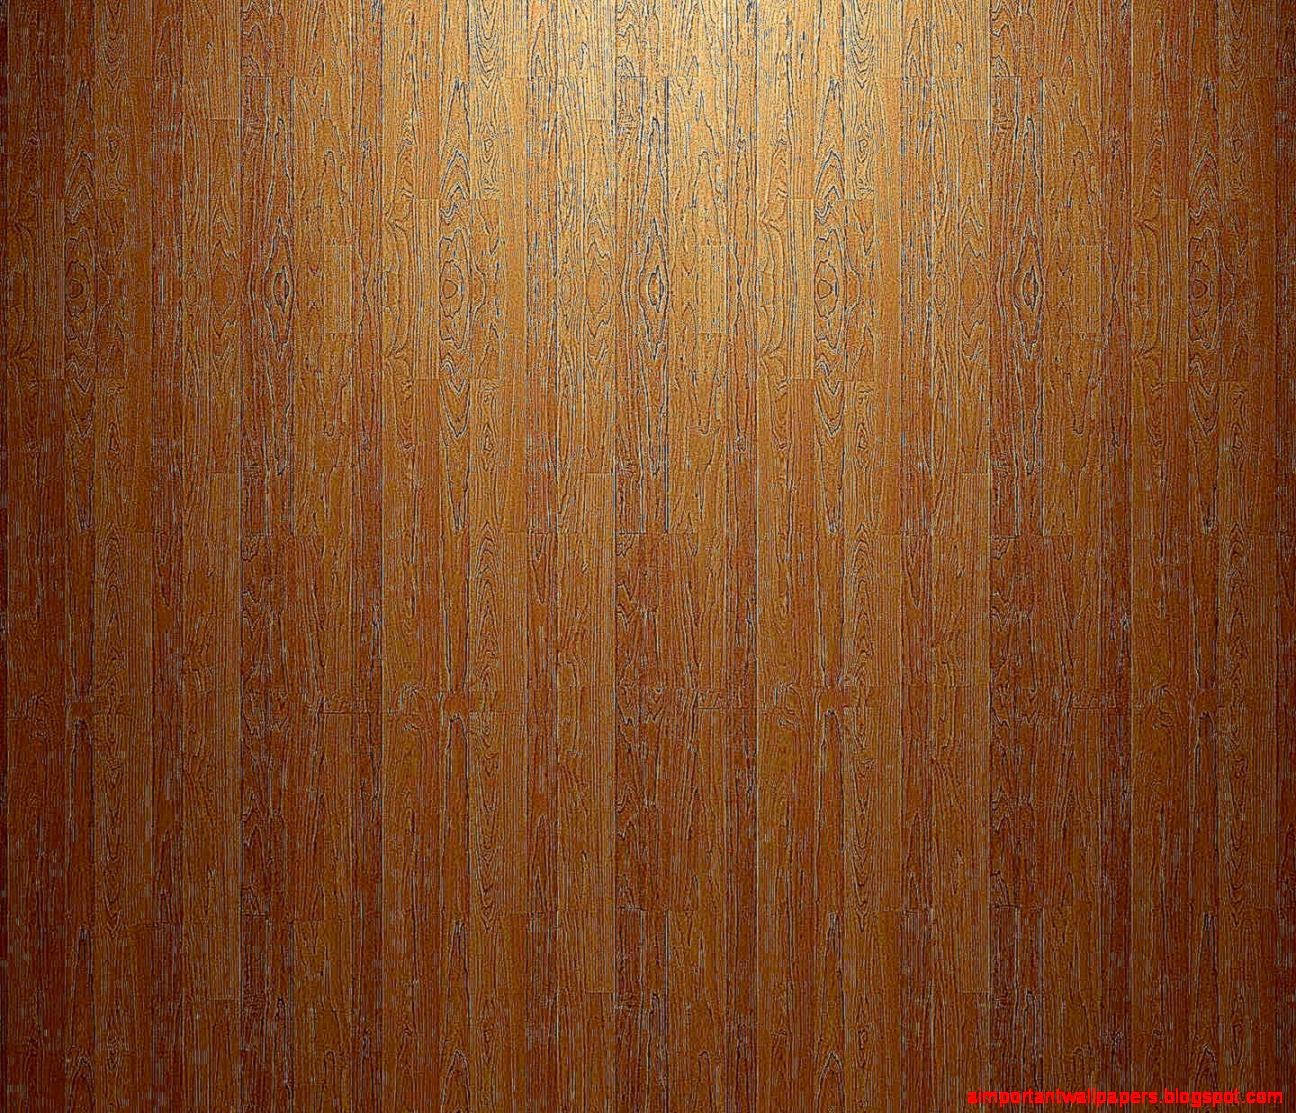 Backgrounds Stunning Wood